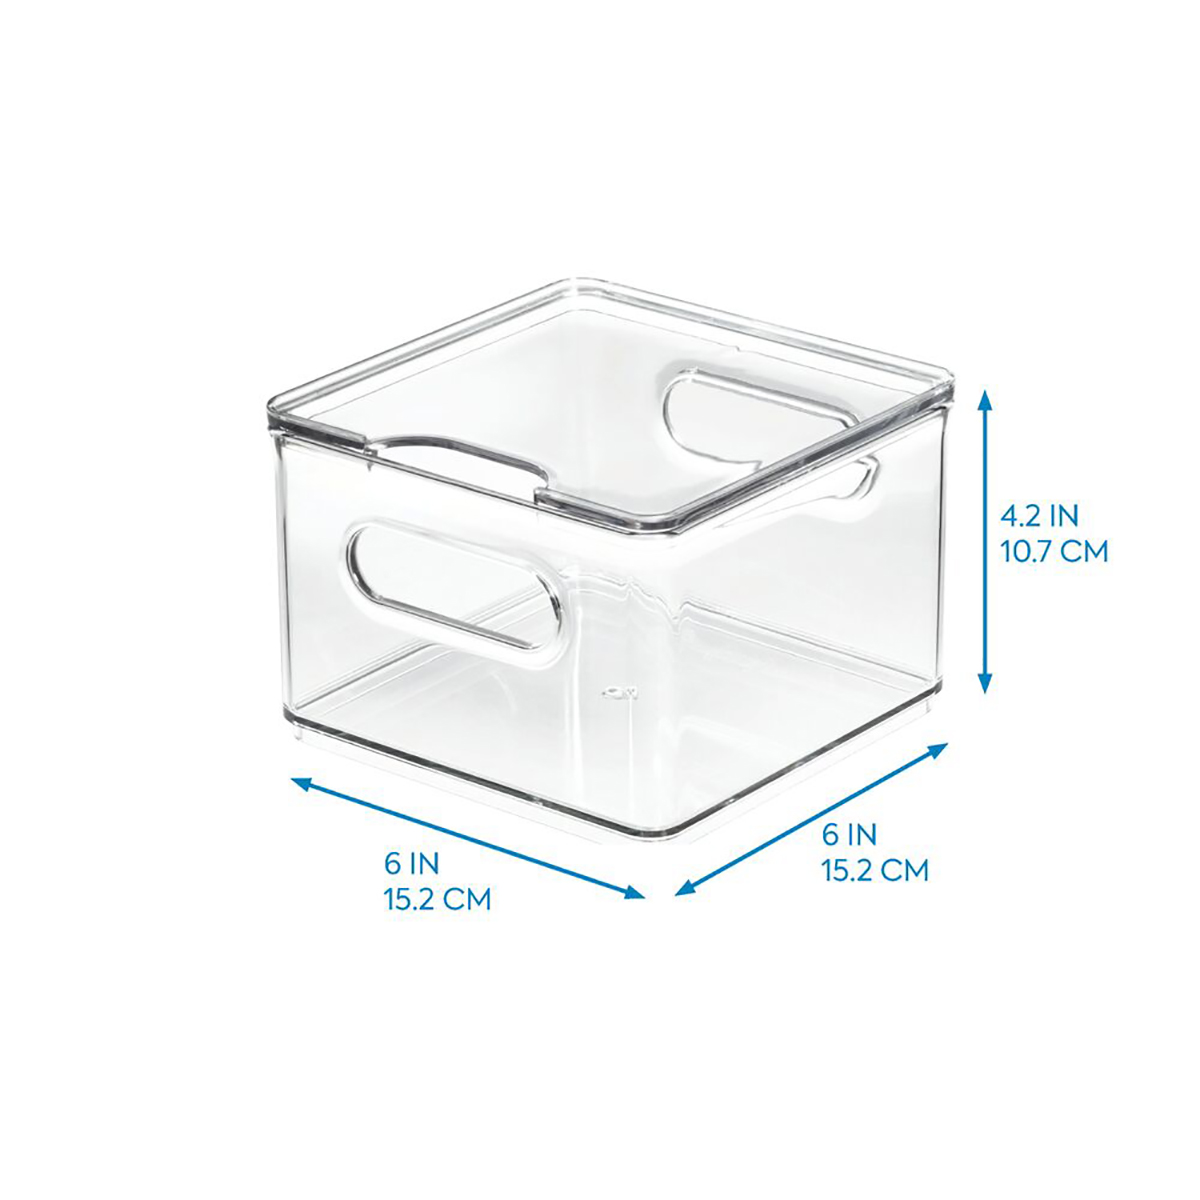 https://www.containerstore.com/catalogimages/420057/1000_Square_JPG-10080426%20-%2004236C%20-%20.jpg